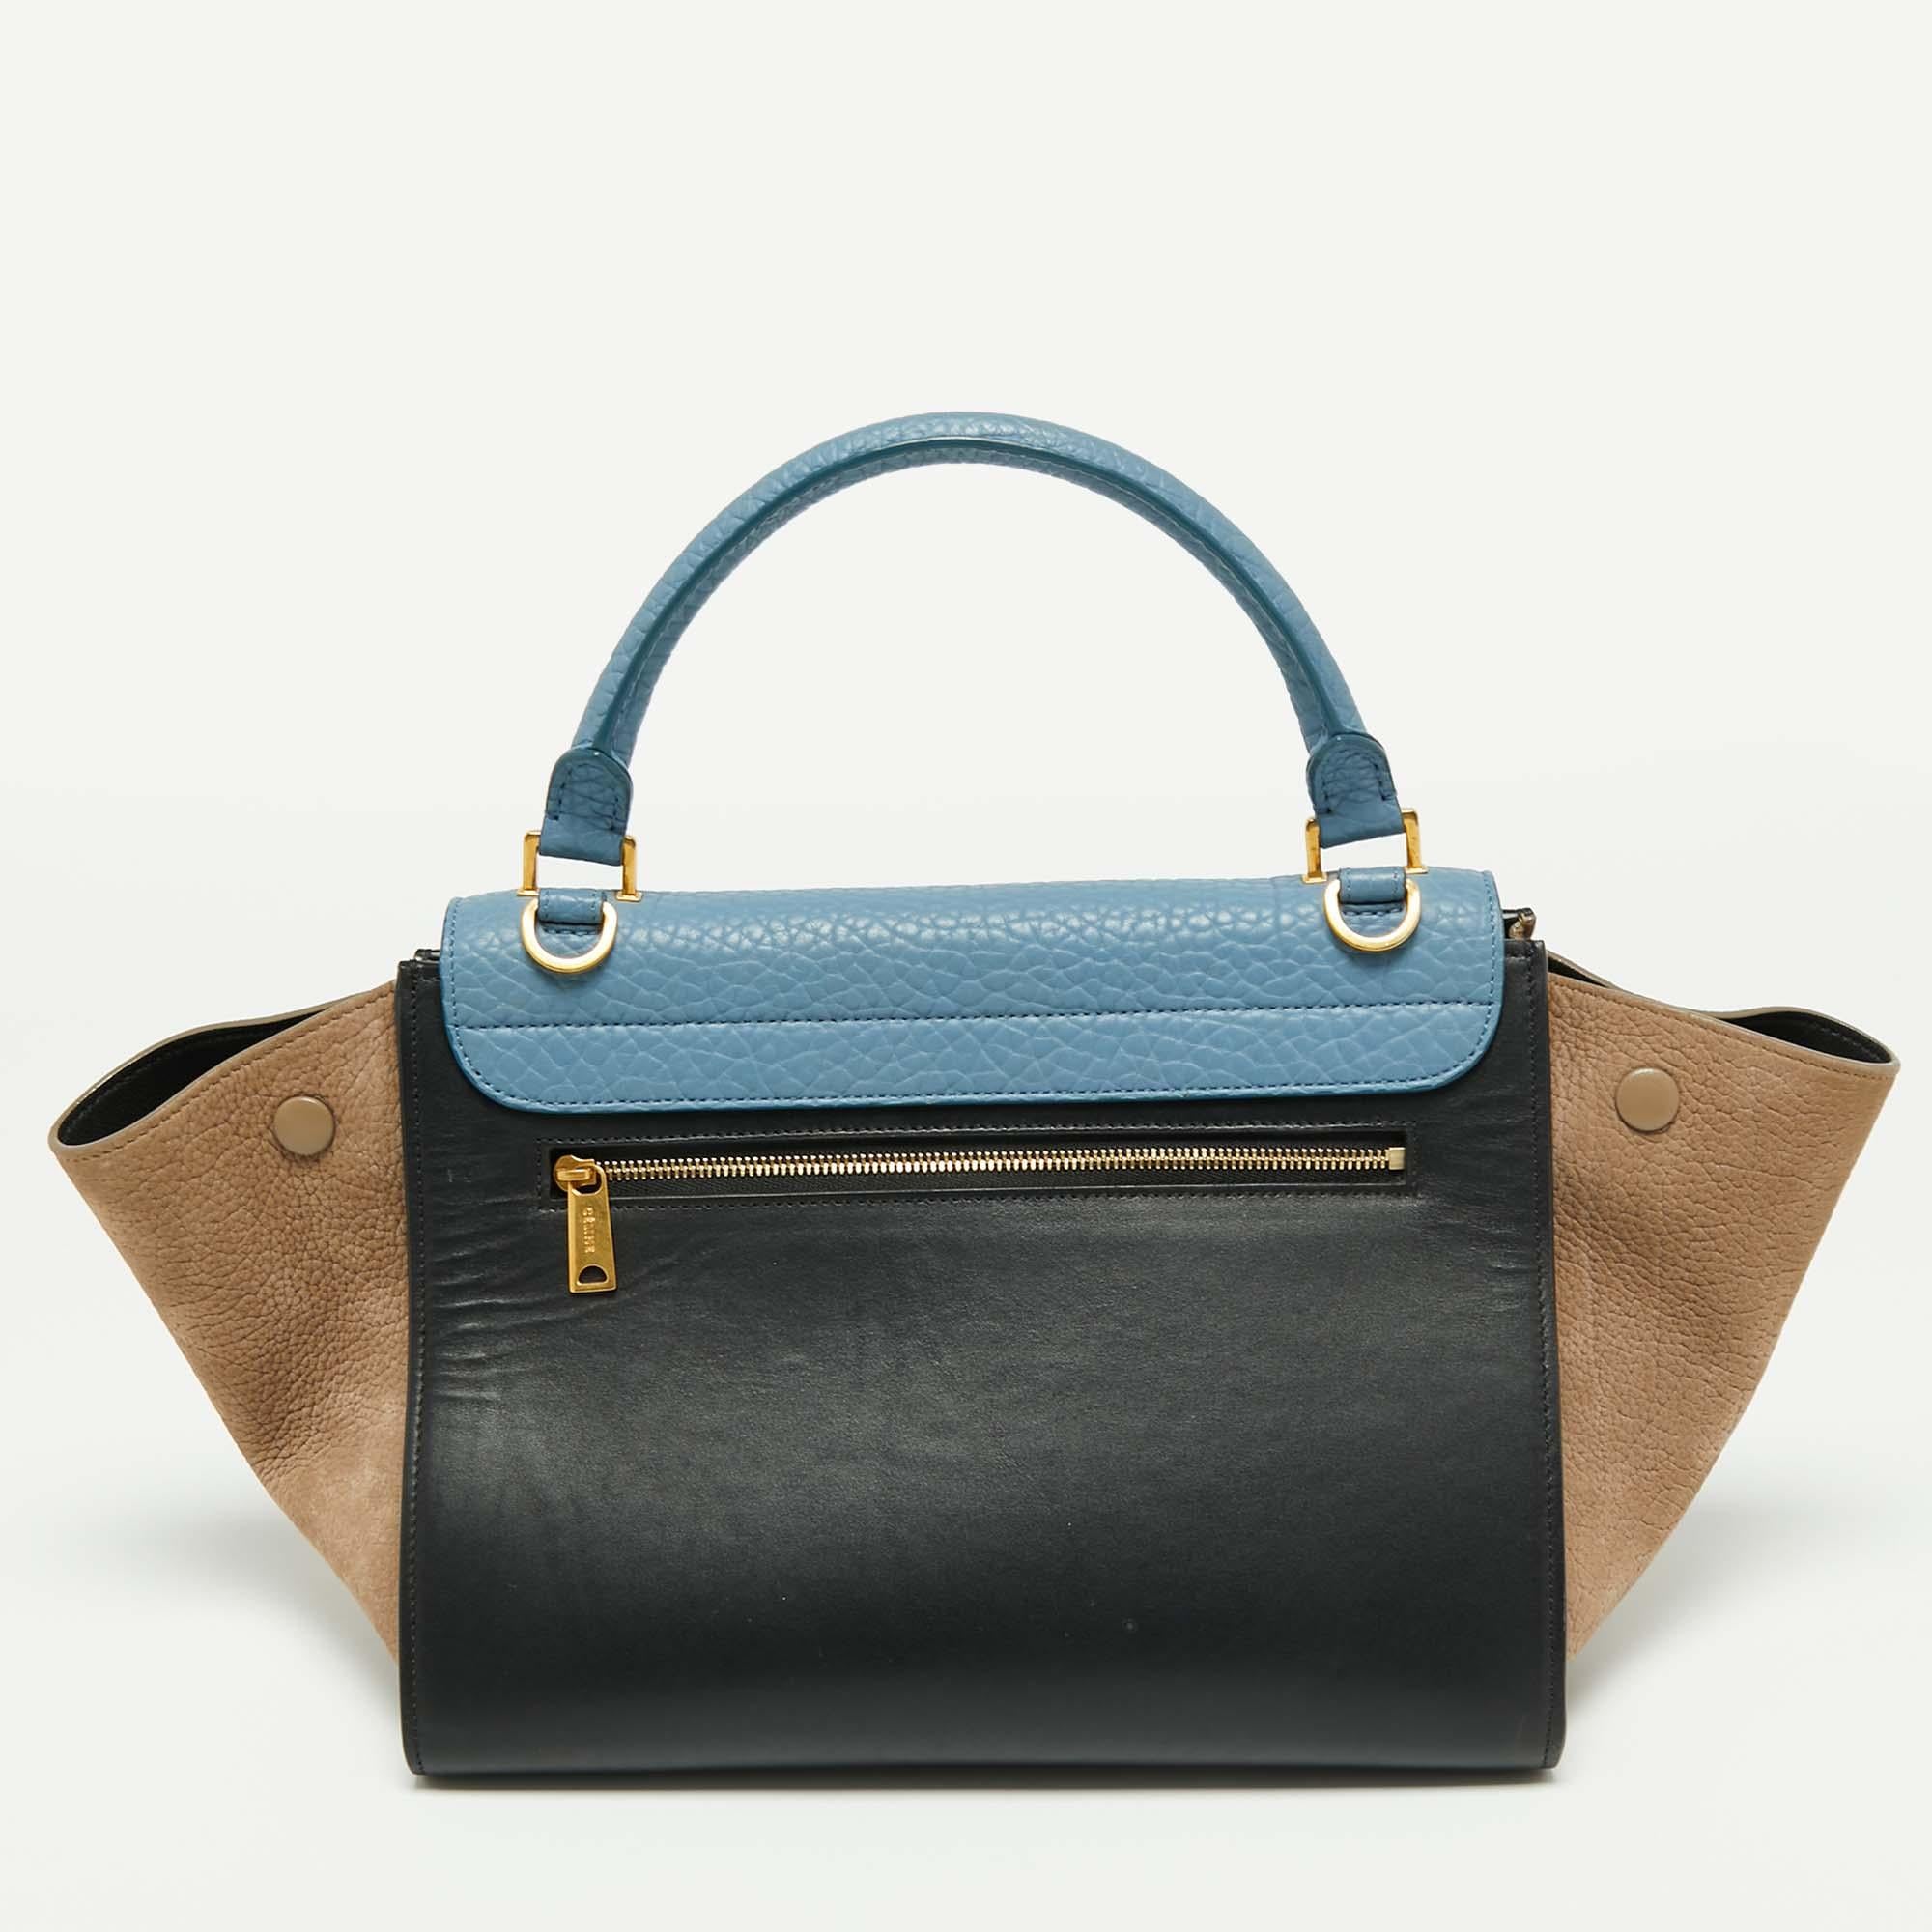 This Trapeze bag is from one of the most loved collections from the House of Céline. This tote serves not just as a luxurious commodity but also acts as the best alternative to carry all your belongings. Its exterior displays blue leather and suede,